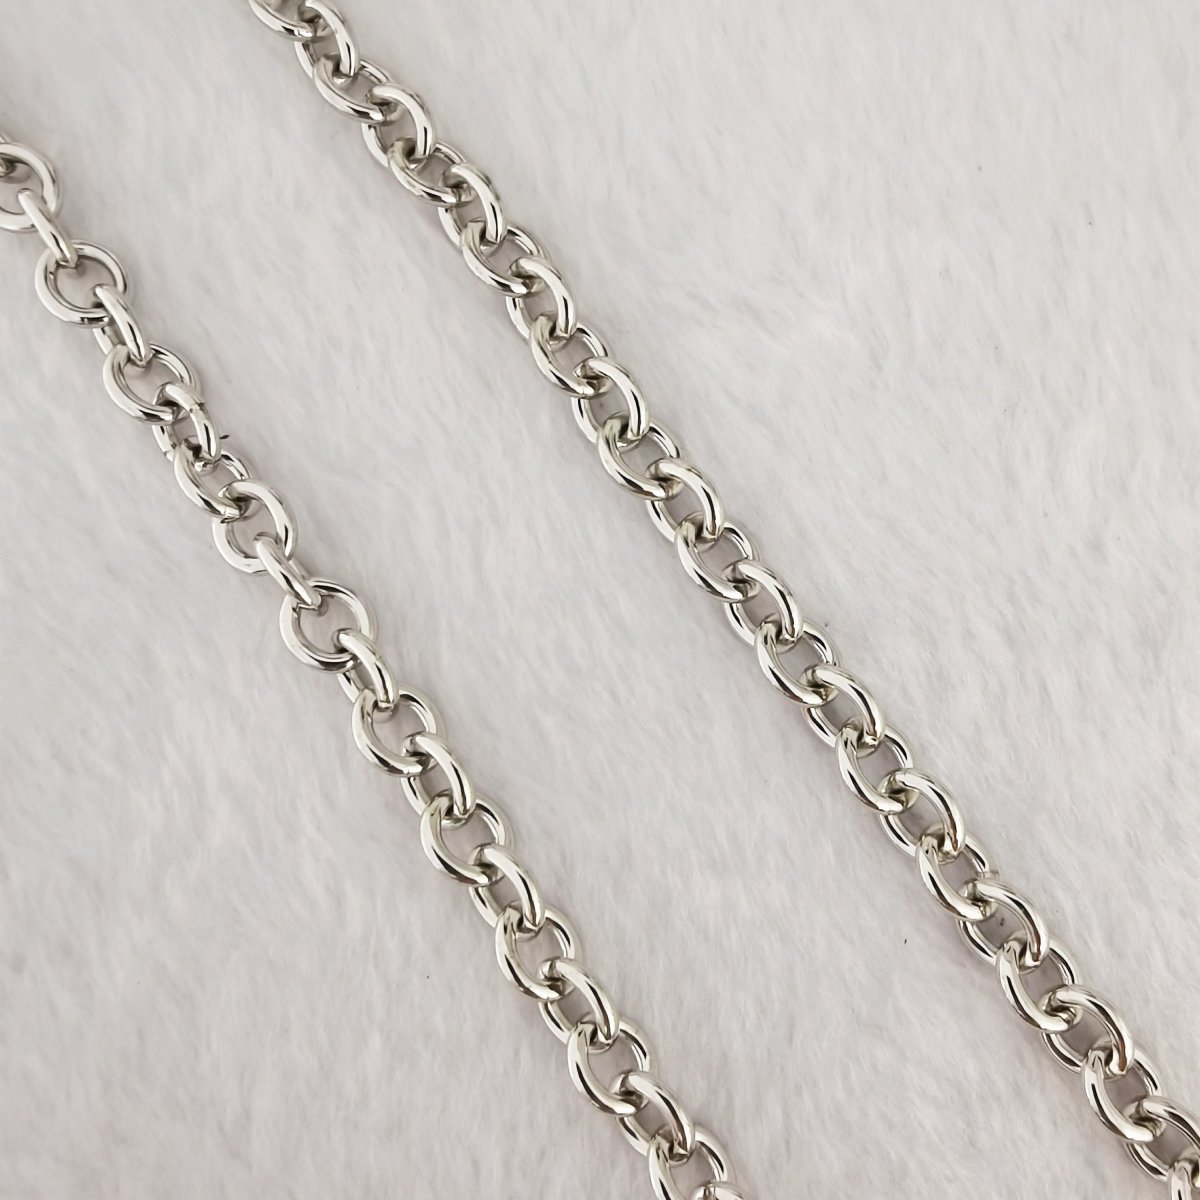 Clearance Pricing BLOWOUT Silver Chunky Round Chains, Link Size 7x7mm, 24k Gold Filled Thick Heavy Large Chain by the Yard Unfinished chain for Jewelry Supply #x004 - DLUXCA